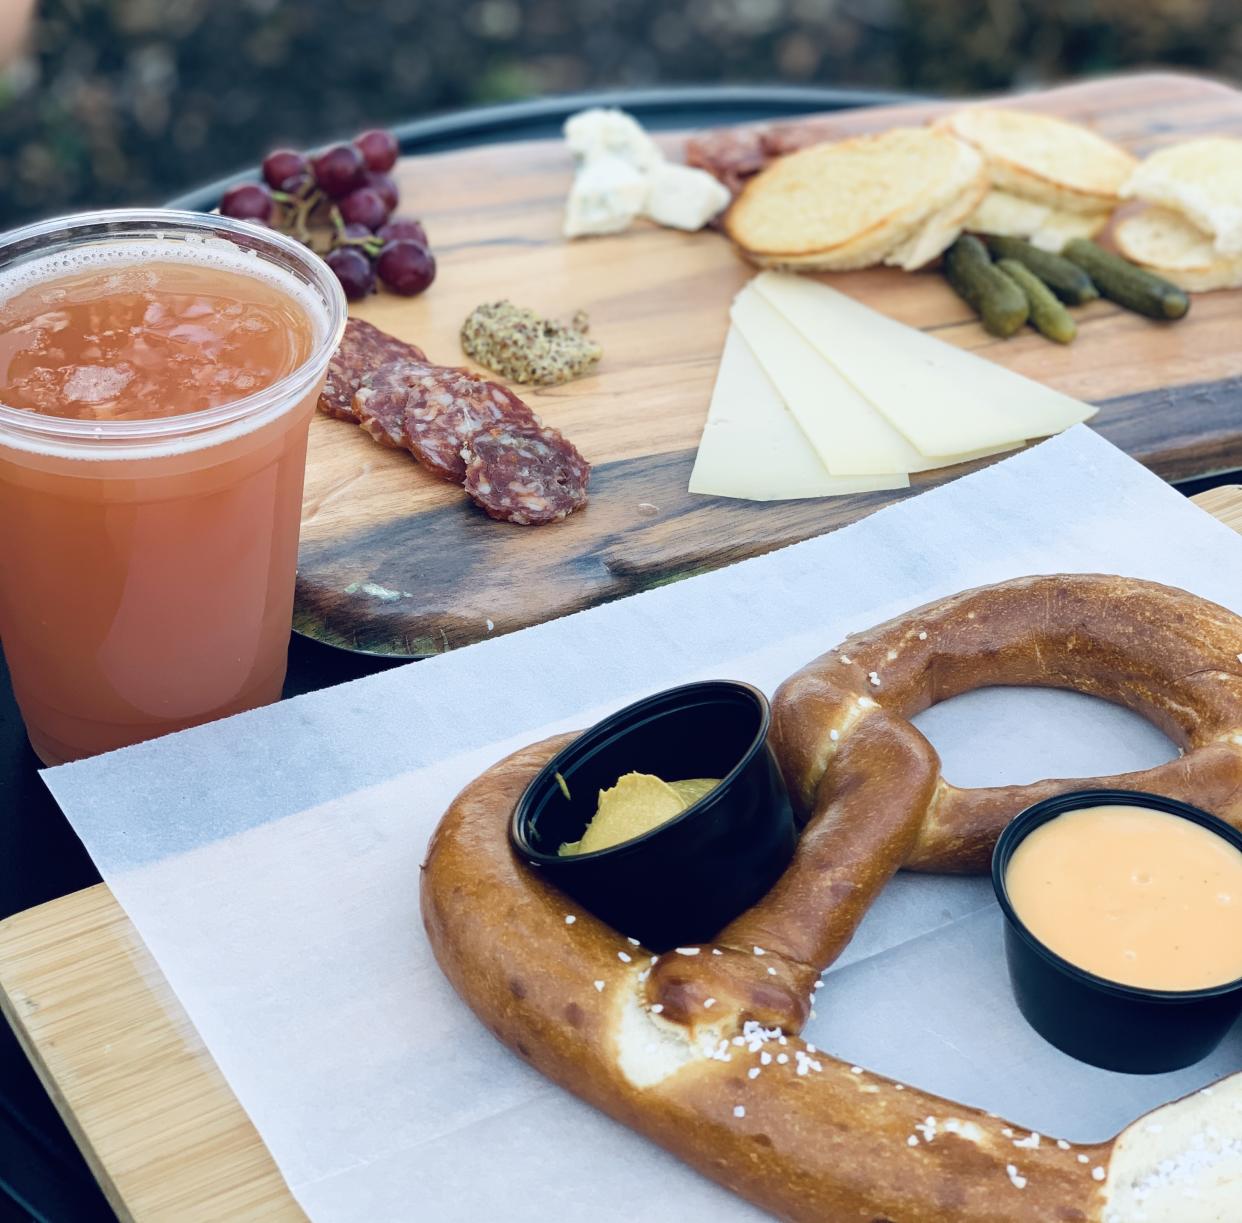 At BaseLine Tap House, beers hailing from the West Coast are served, as well as a delicious charcuterie board. (Photo: Carly Caramanna)